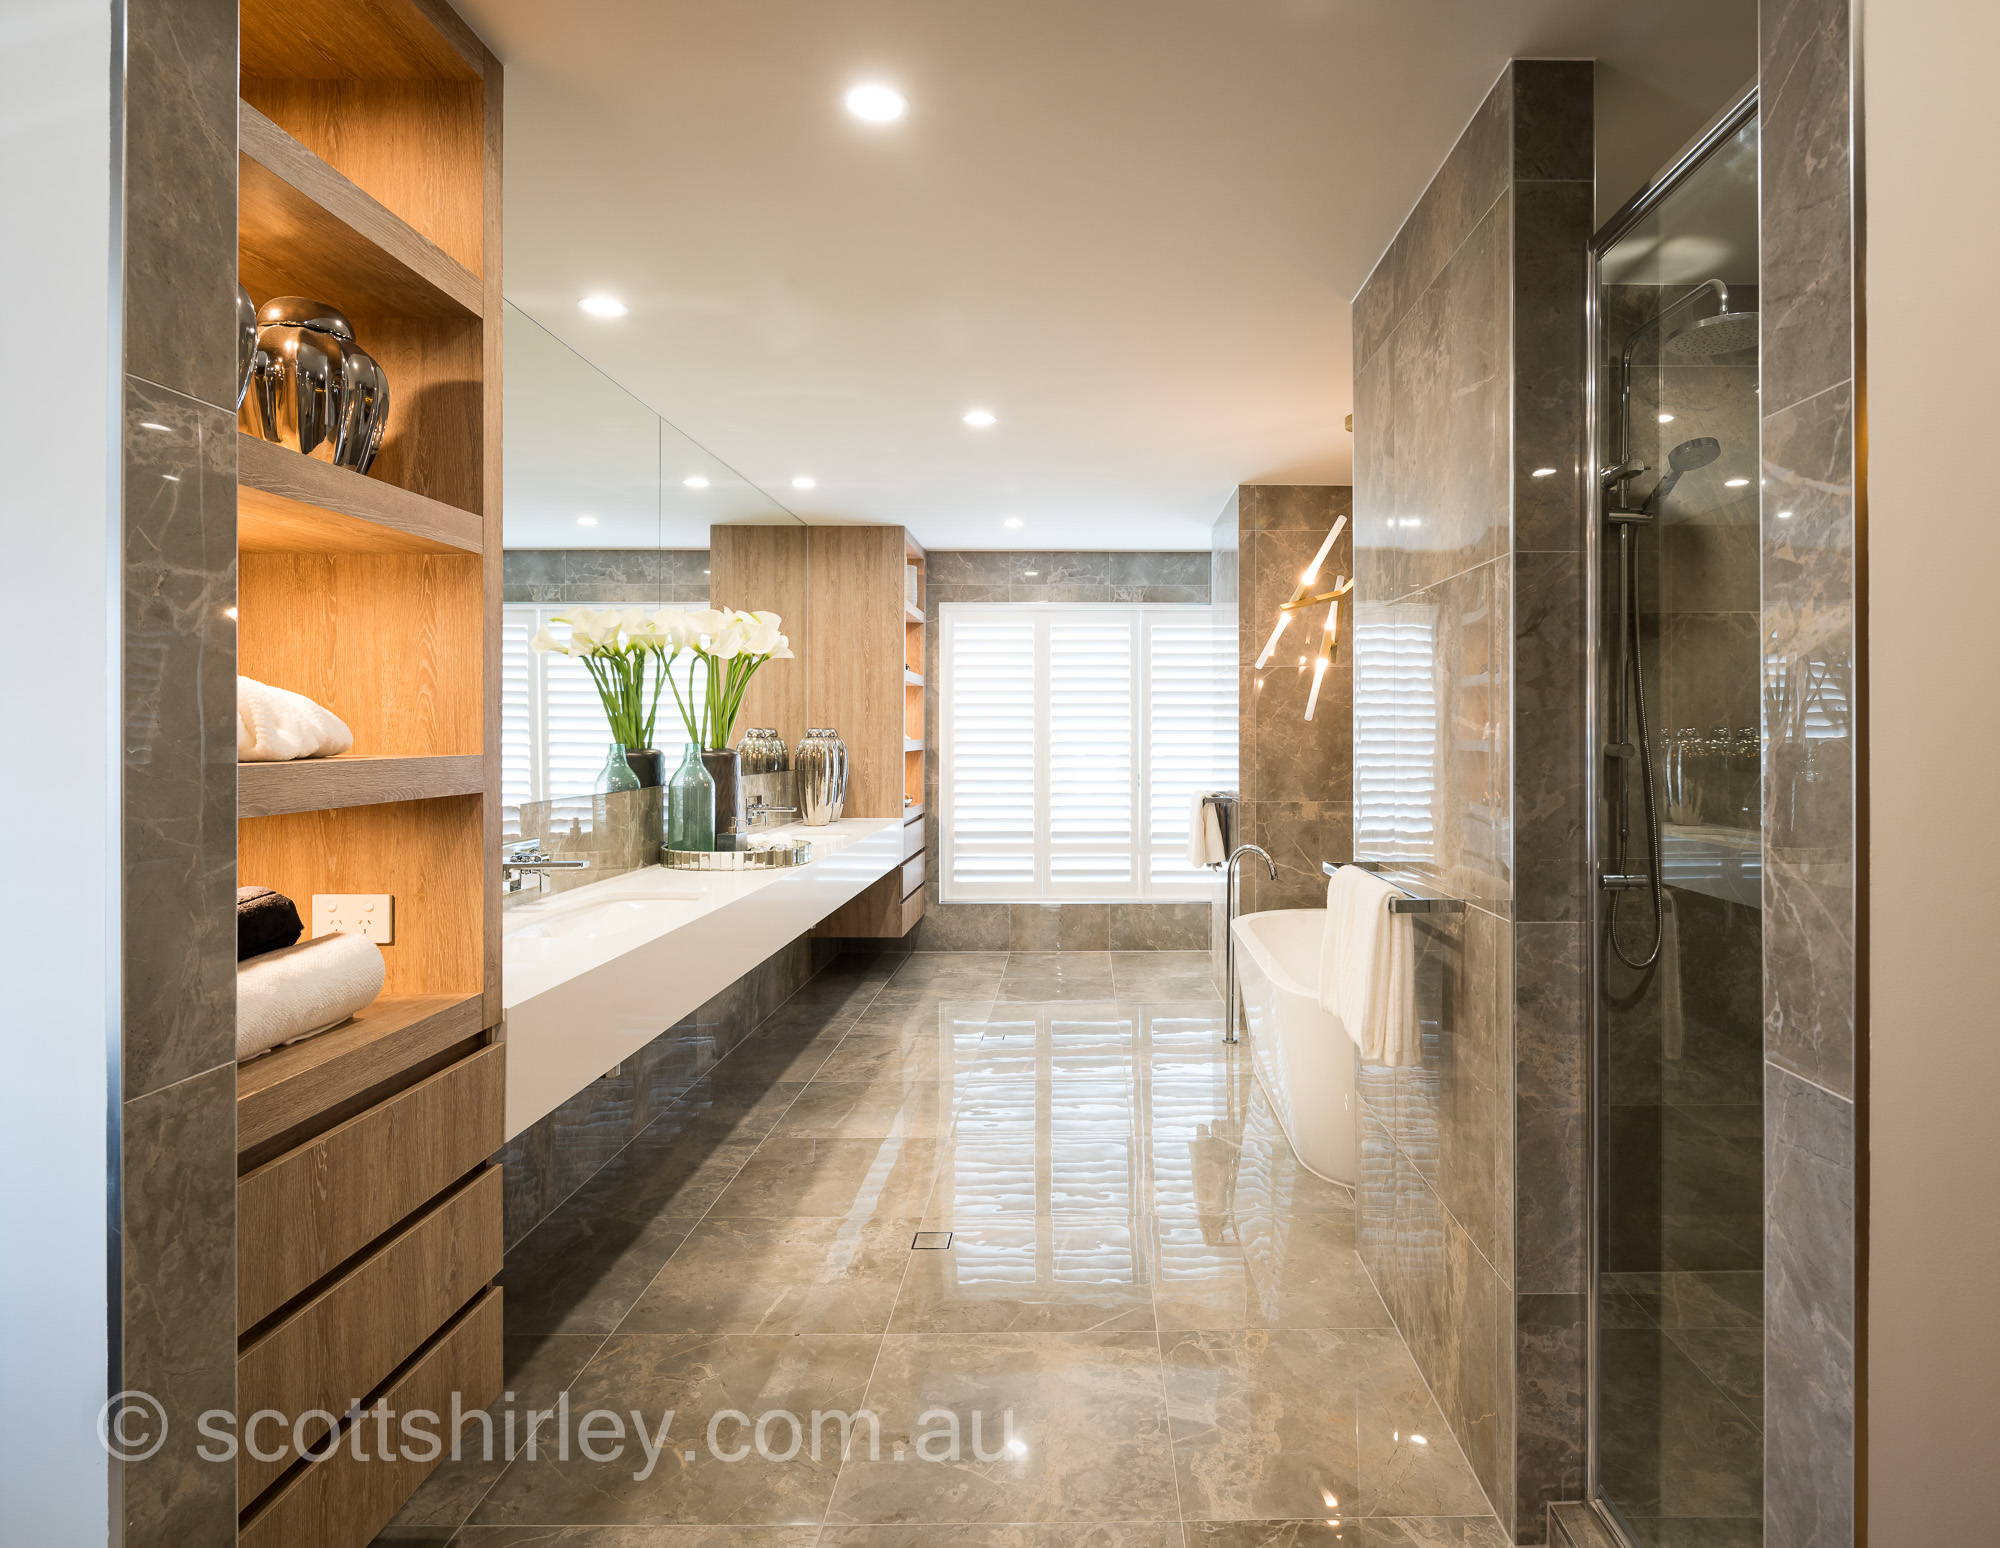 121121_piazza_burpengary_north_harbour-104